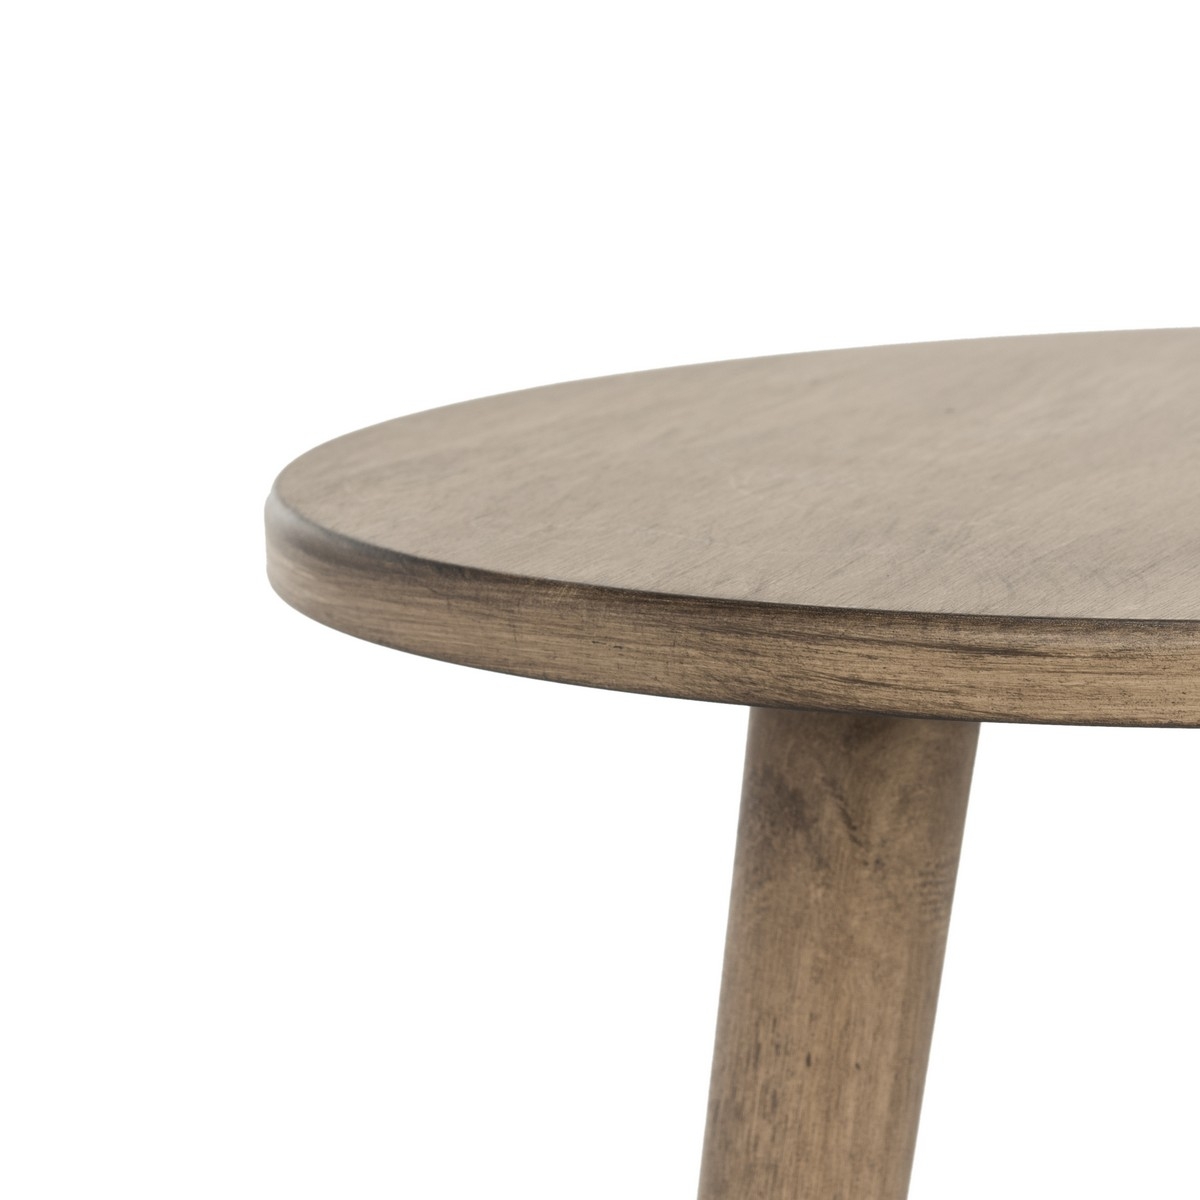 Orion Round Accent Table - Desert Brown - Arlo Home - Image 1